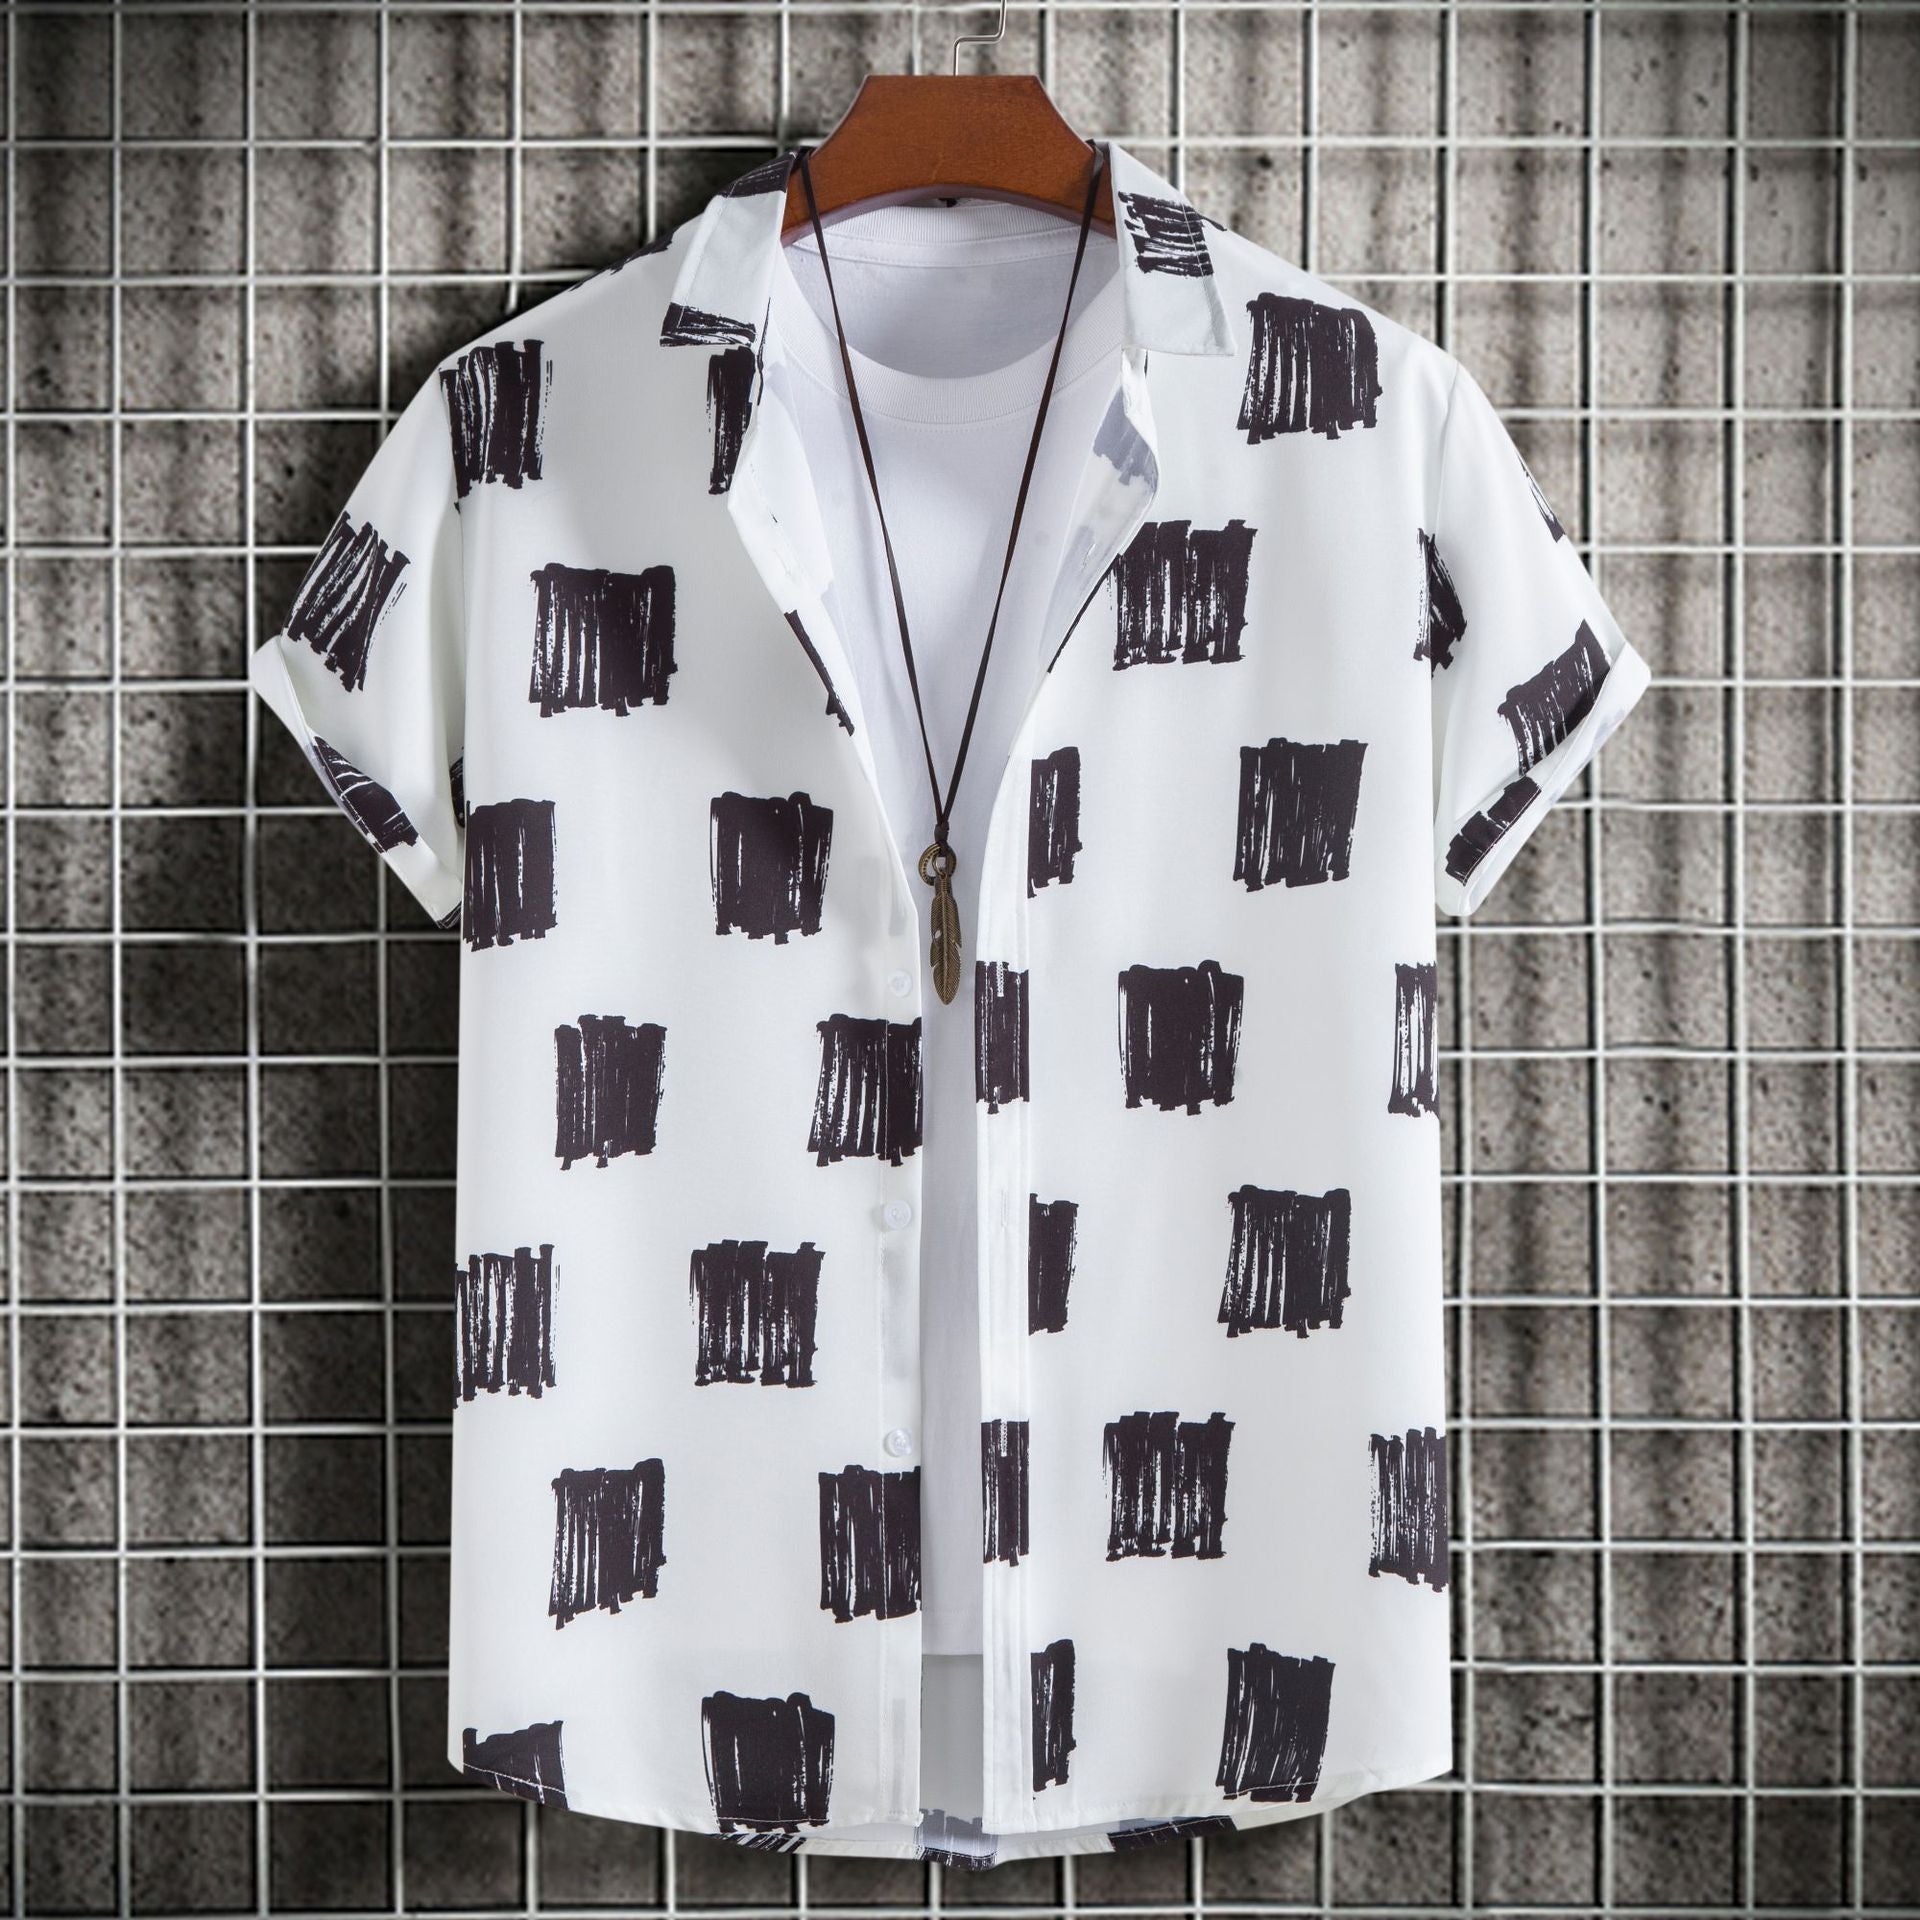 Men's Fashion Slim-fit Printed Short Sleeve Button Up Shirts